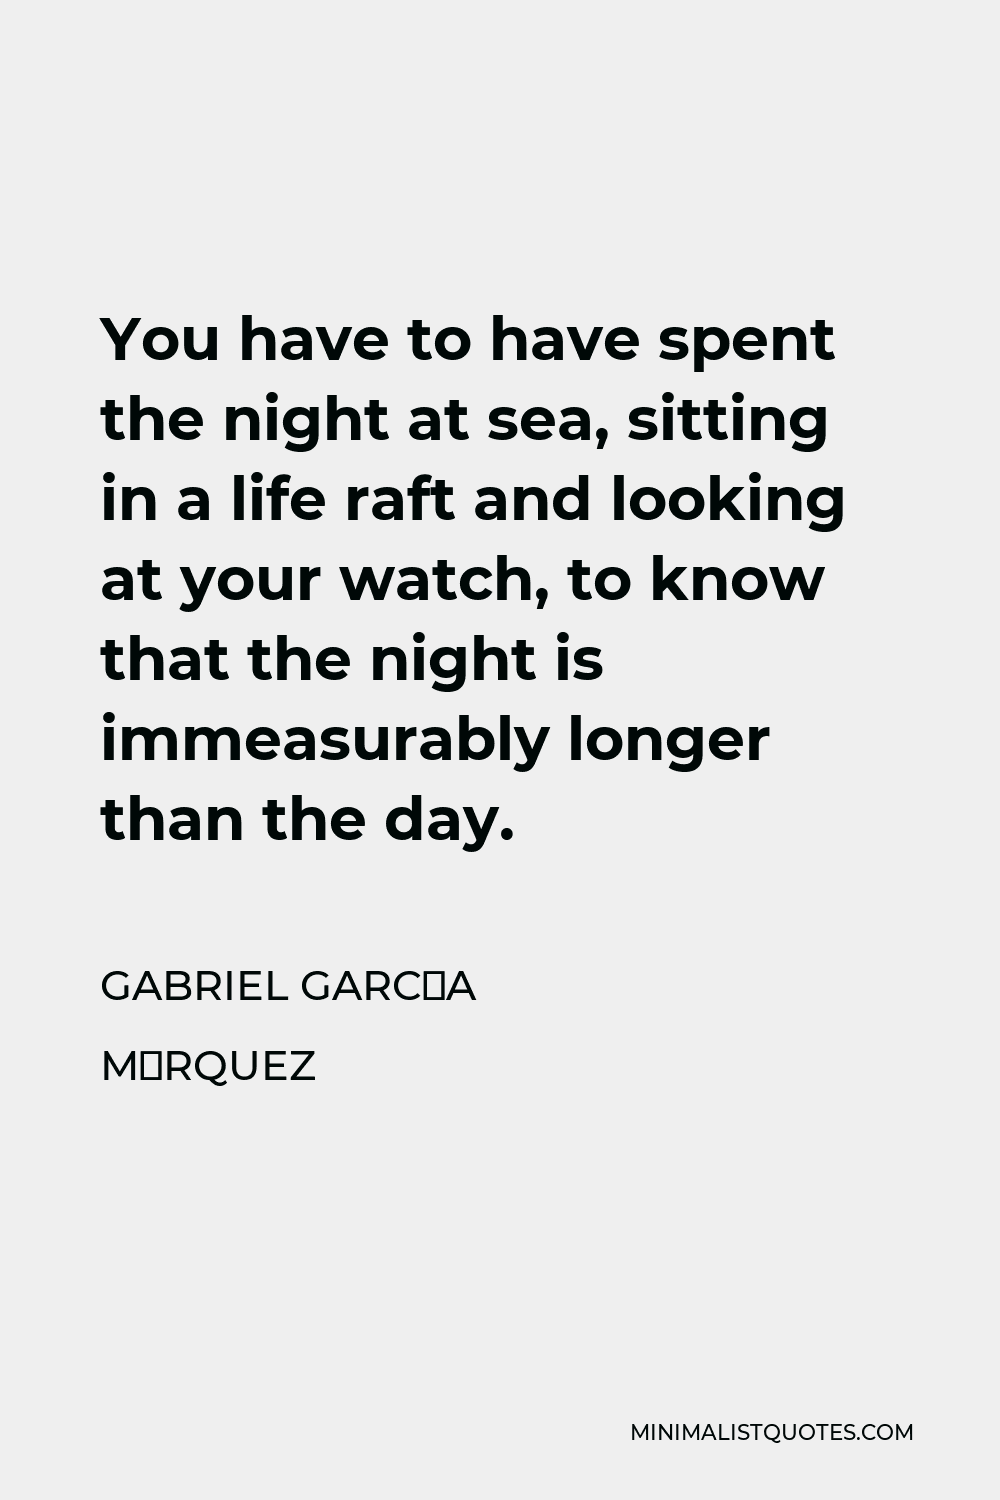 Gabriel García Márquez Quote - You have to have spent the night at sea, sitting in a life raft and looking at your watch, to know that the night is immeasurably longer than the day.